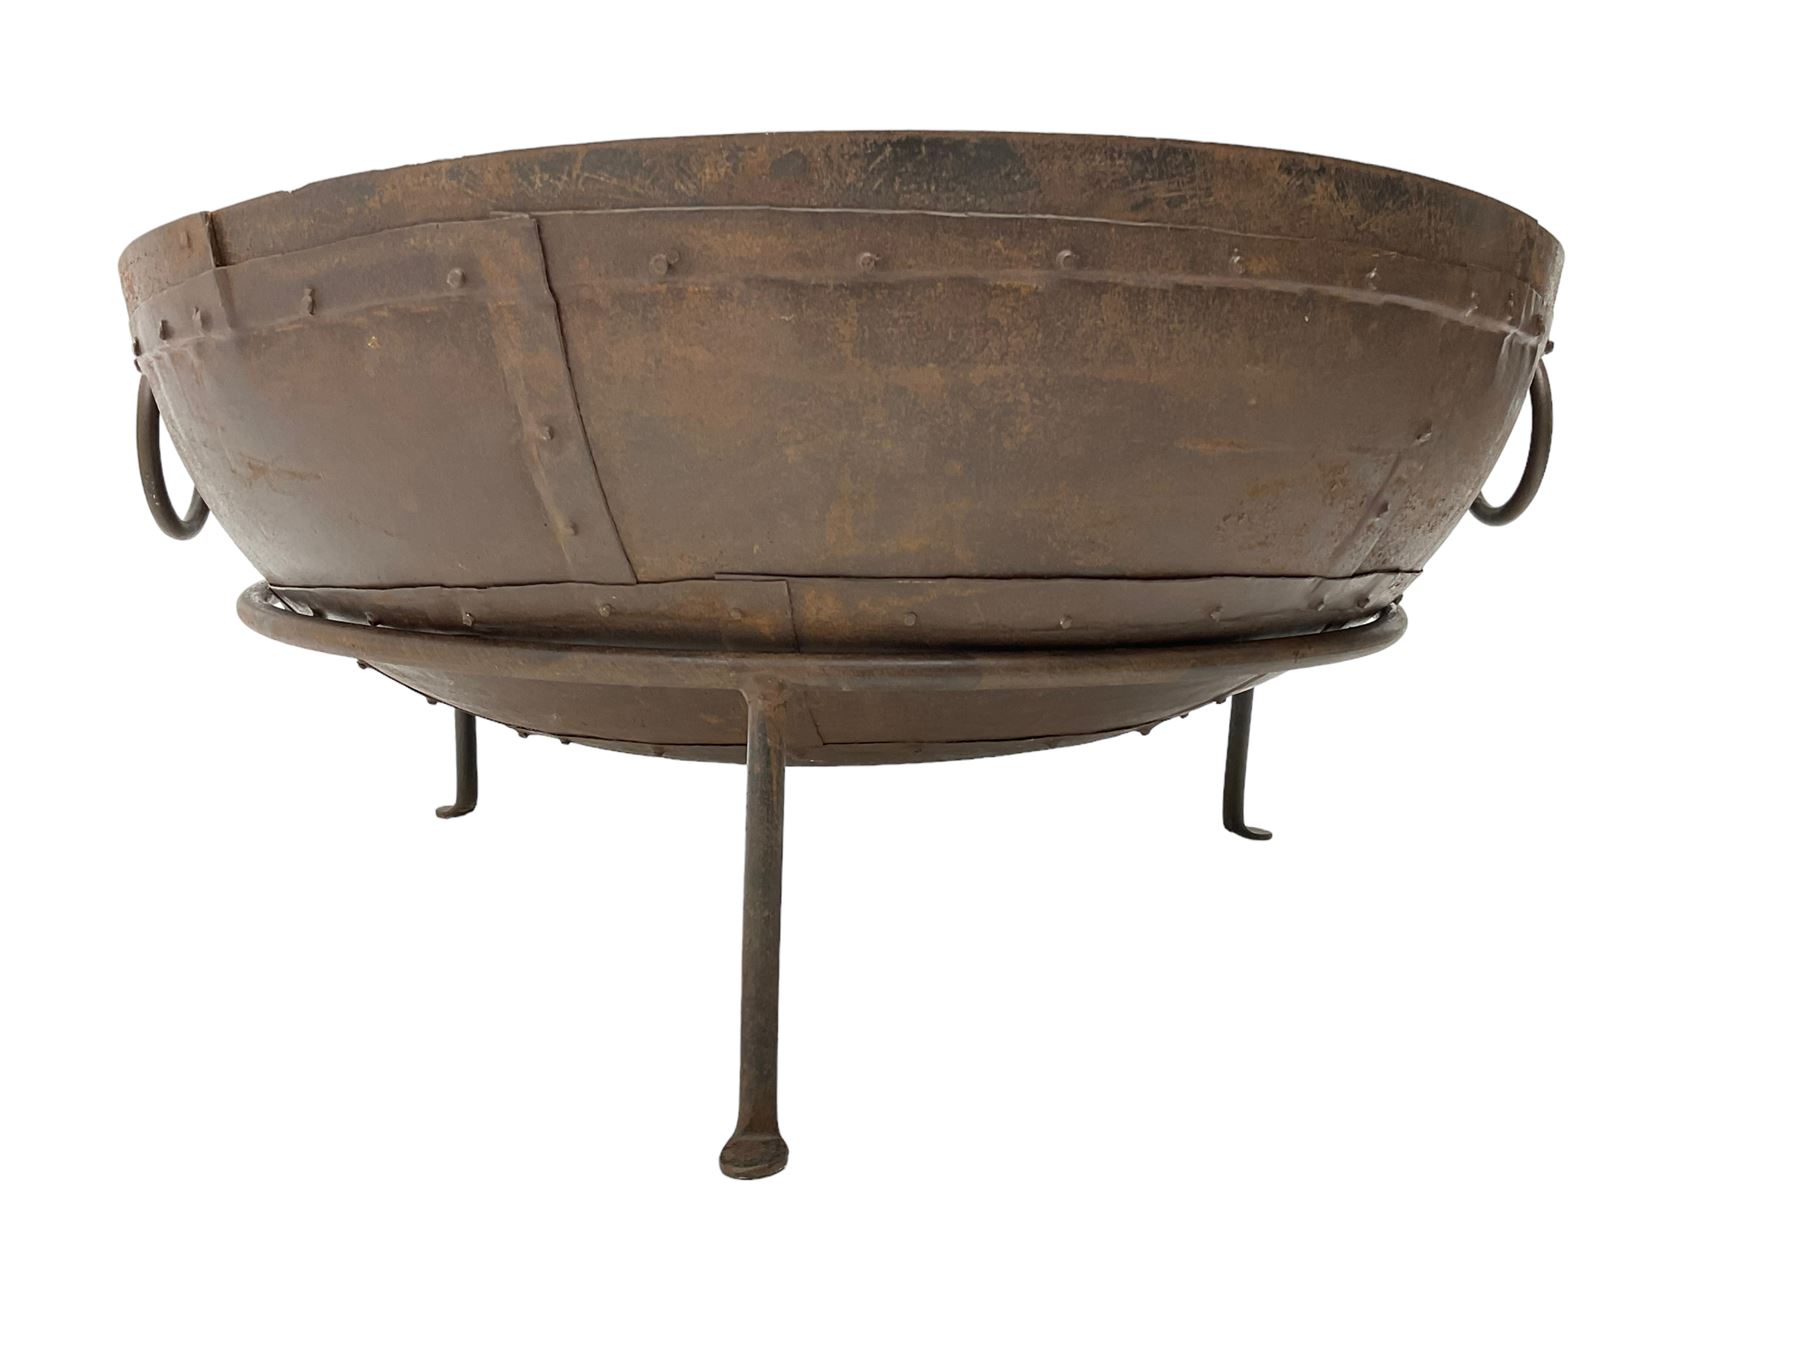 Circular riveted iron fire pit - Image 4 of 7